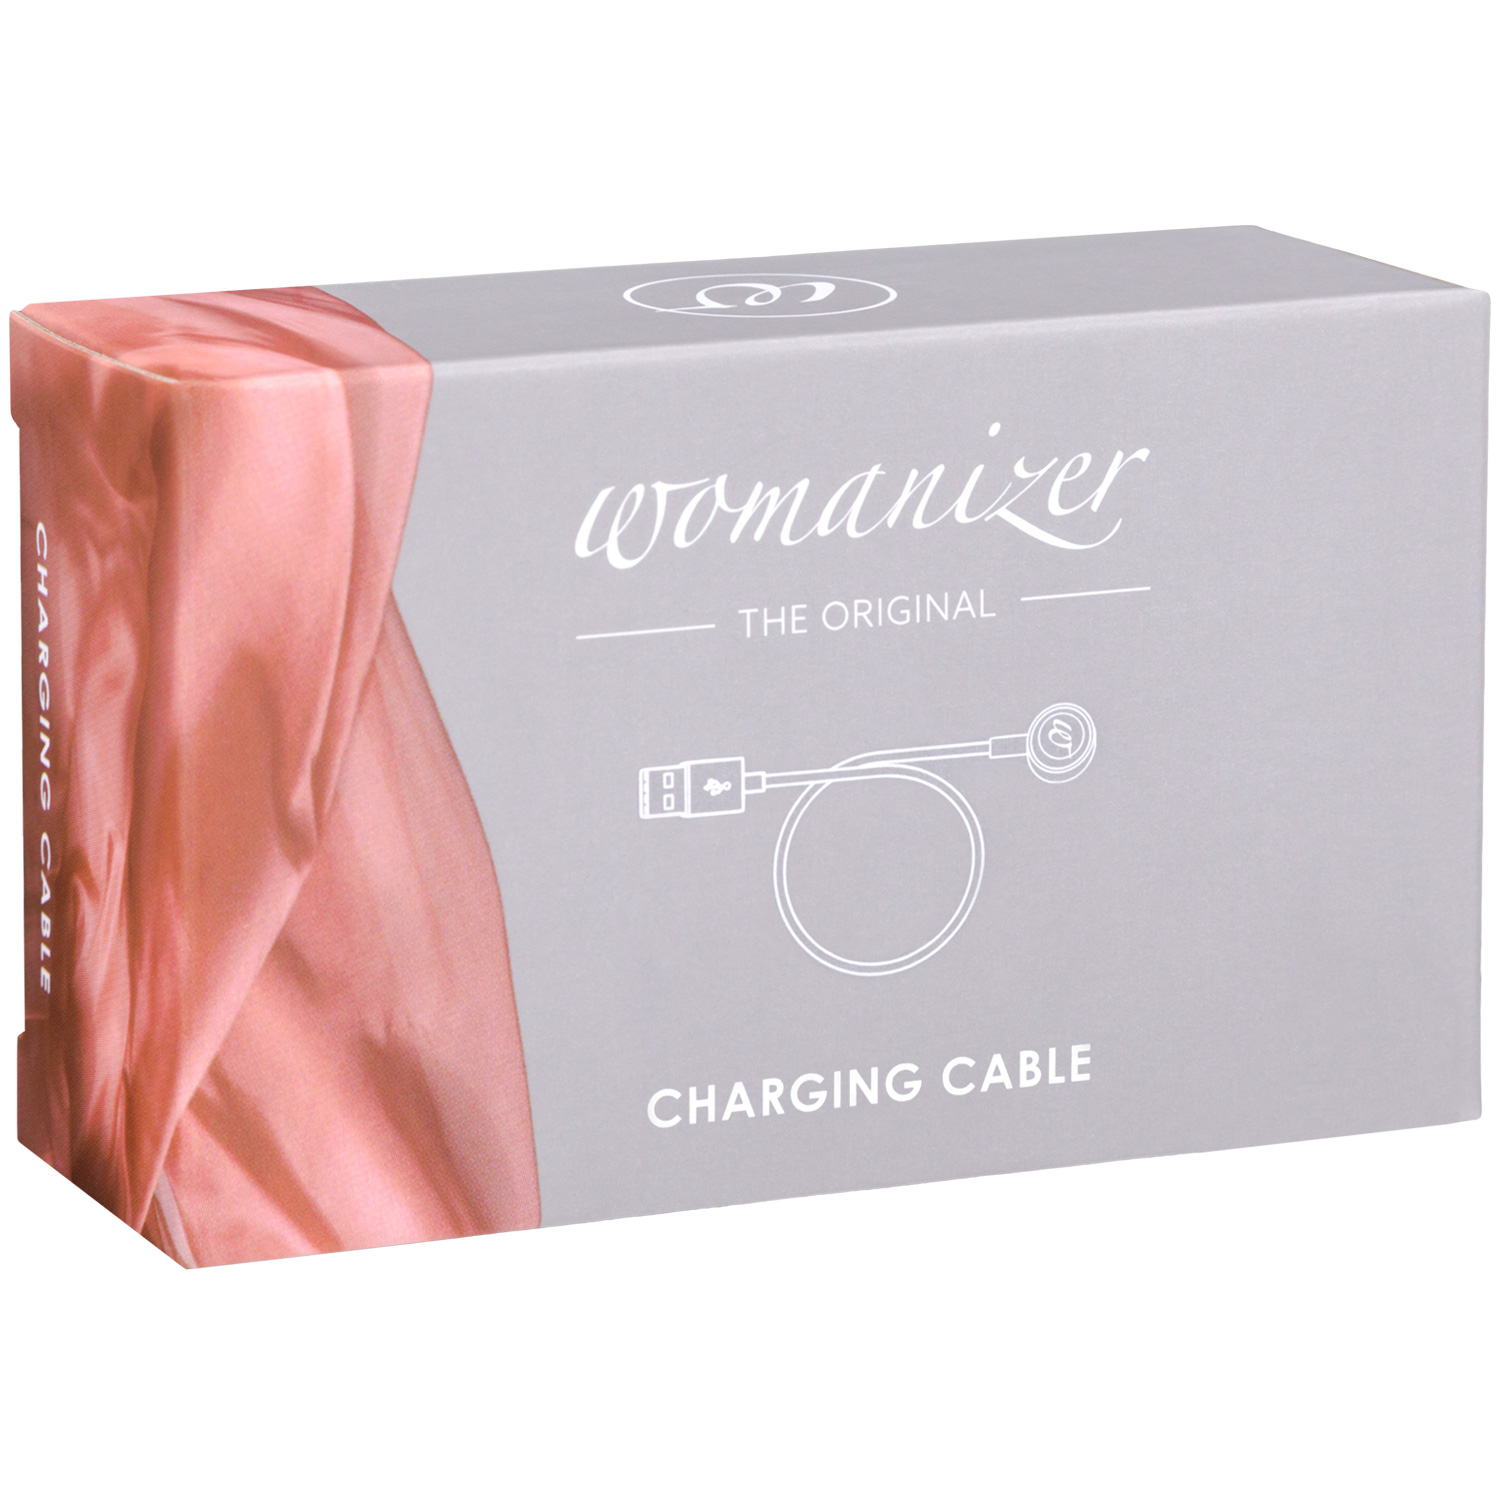 Womanizer USB-laddare med Magnet - Womanizer